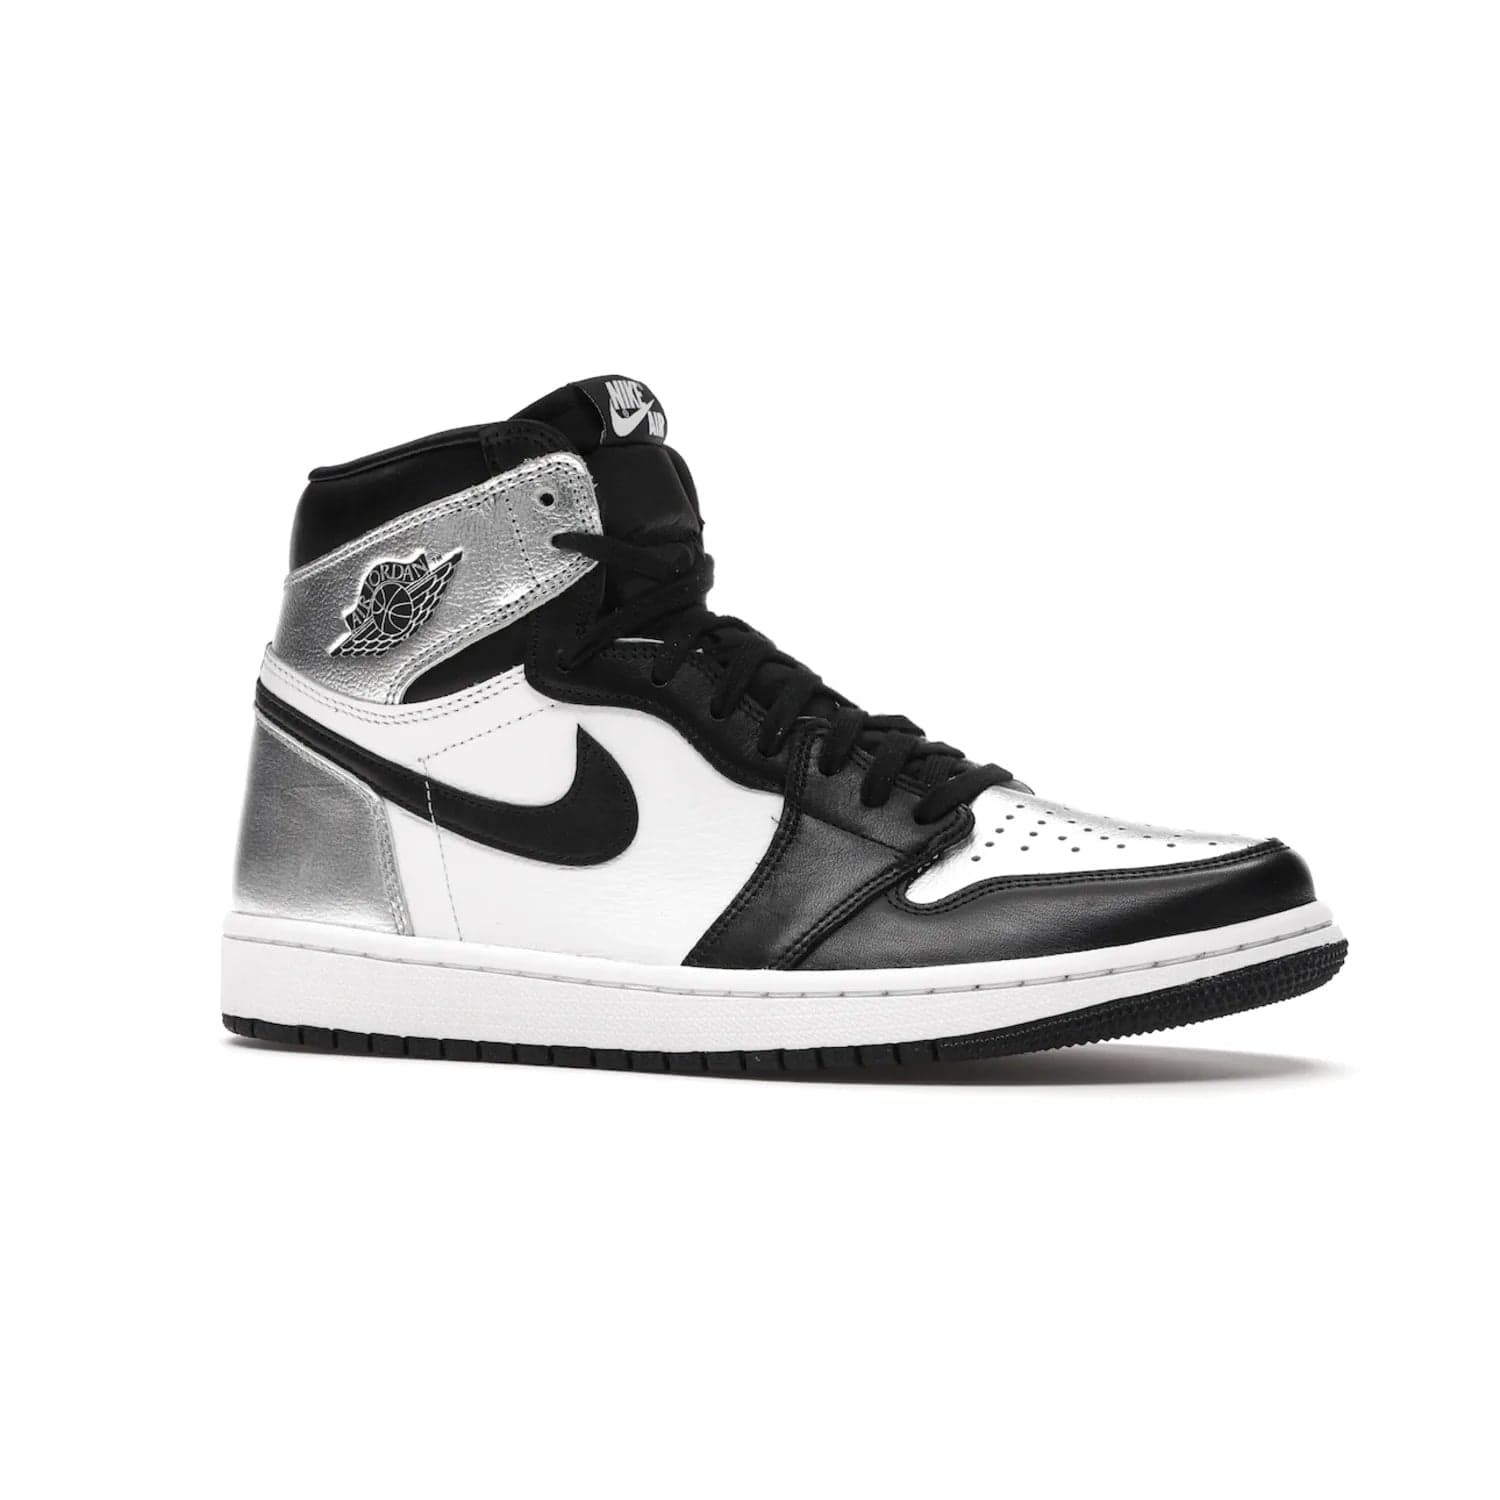 Jordan 1 Retro High Silver Toe (Women's) - Image 3 - Only at www.BallersClubKickz.com - Introducing the Jordan 1 Retro High Silver Toe (Women's): an updated spin on the iconic 'Black Toe' theme. Featuring white & black leather and silver patent leather construction. Nike Air branding, Air Jordan Wings logo, and white/black sole finish give a classic look. The perfect addition to an on-trend streetwear look. Available in classic black & white, this Jordan 1 is an instant classic. Released in February 202